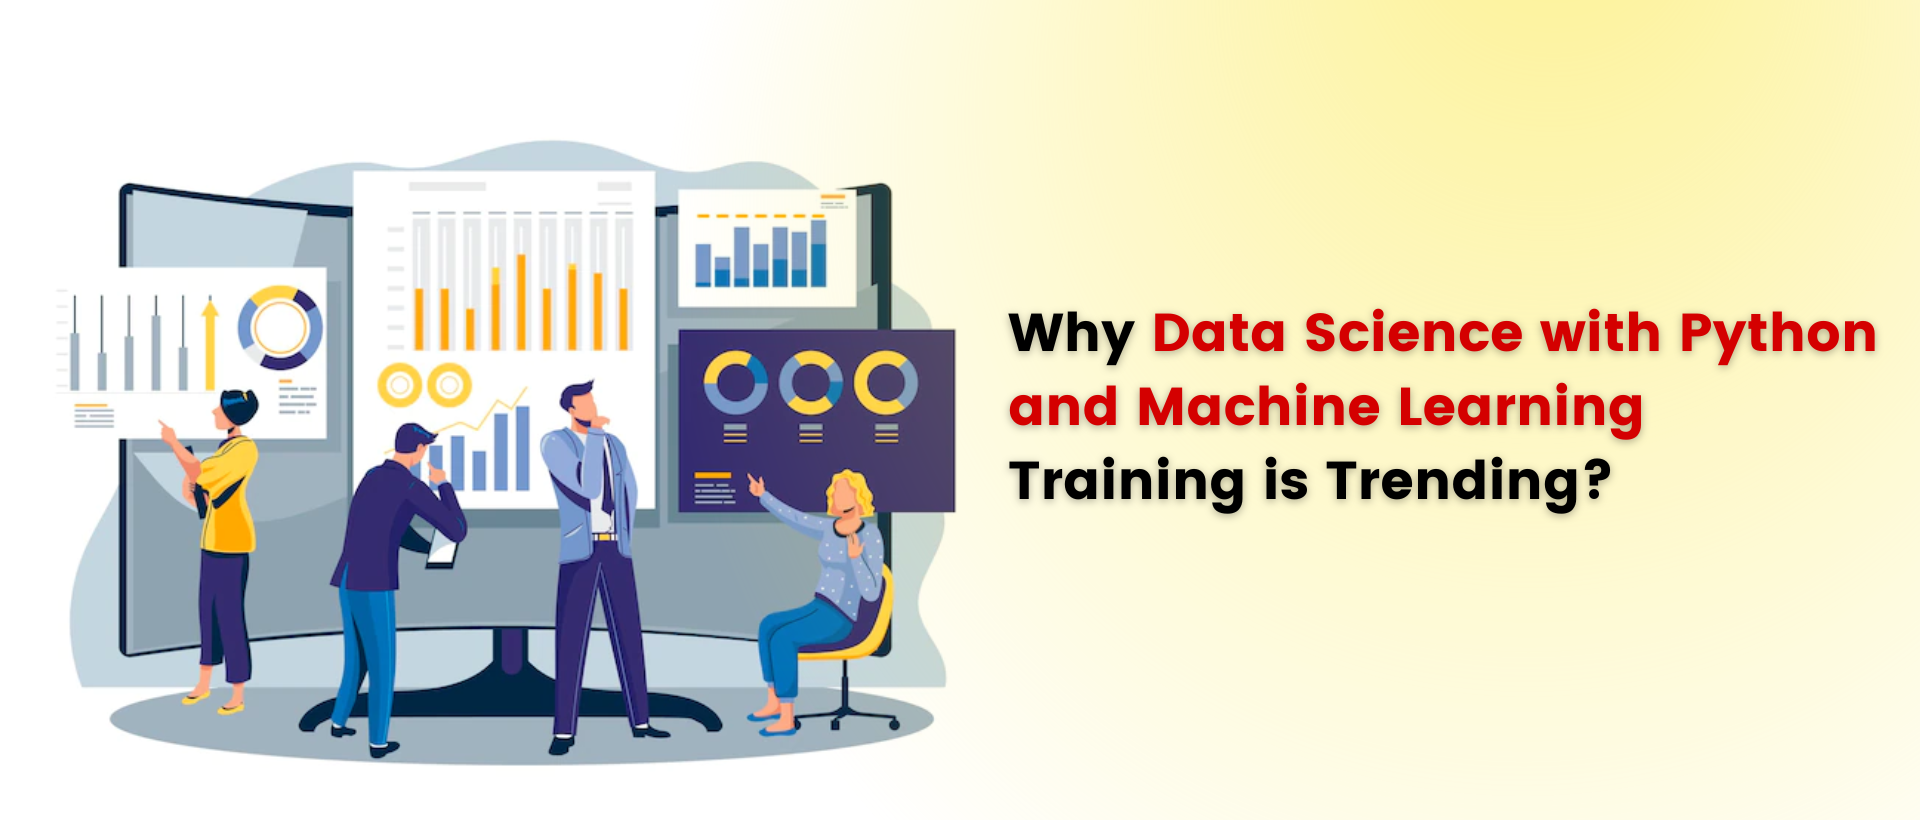 Why Data Science with Python and Machine Learning Training is Trending?